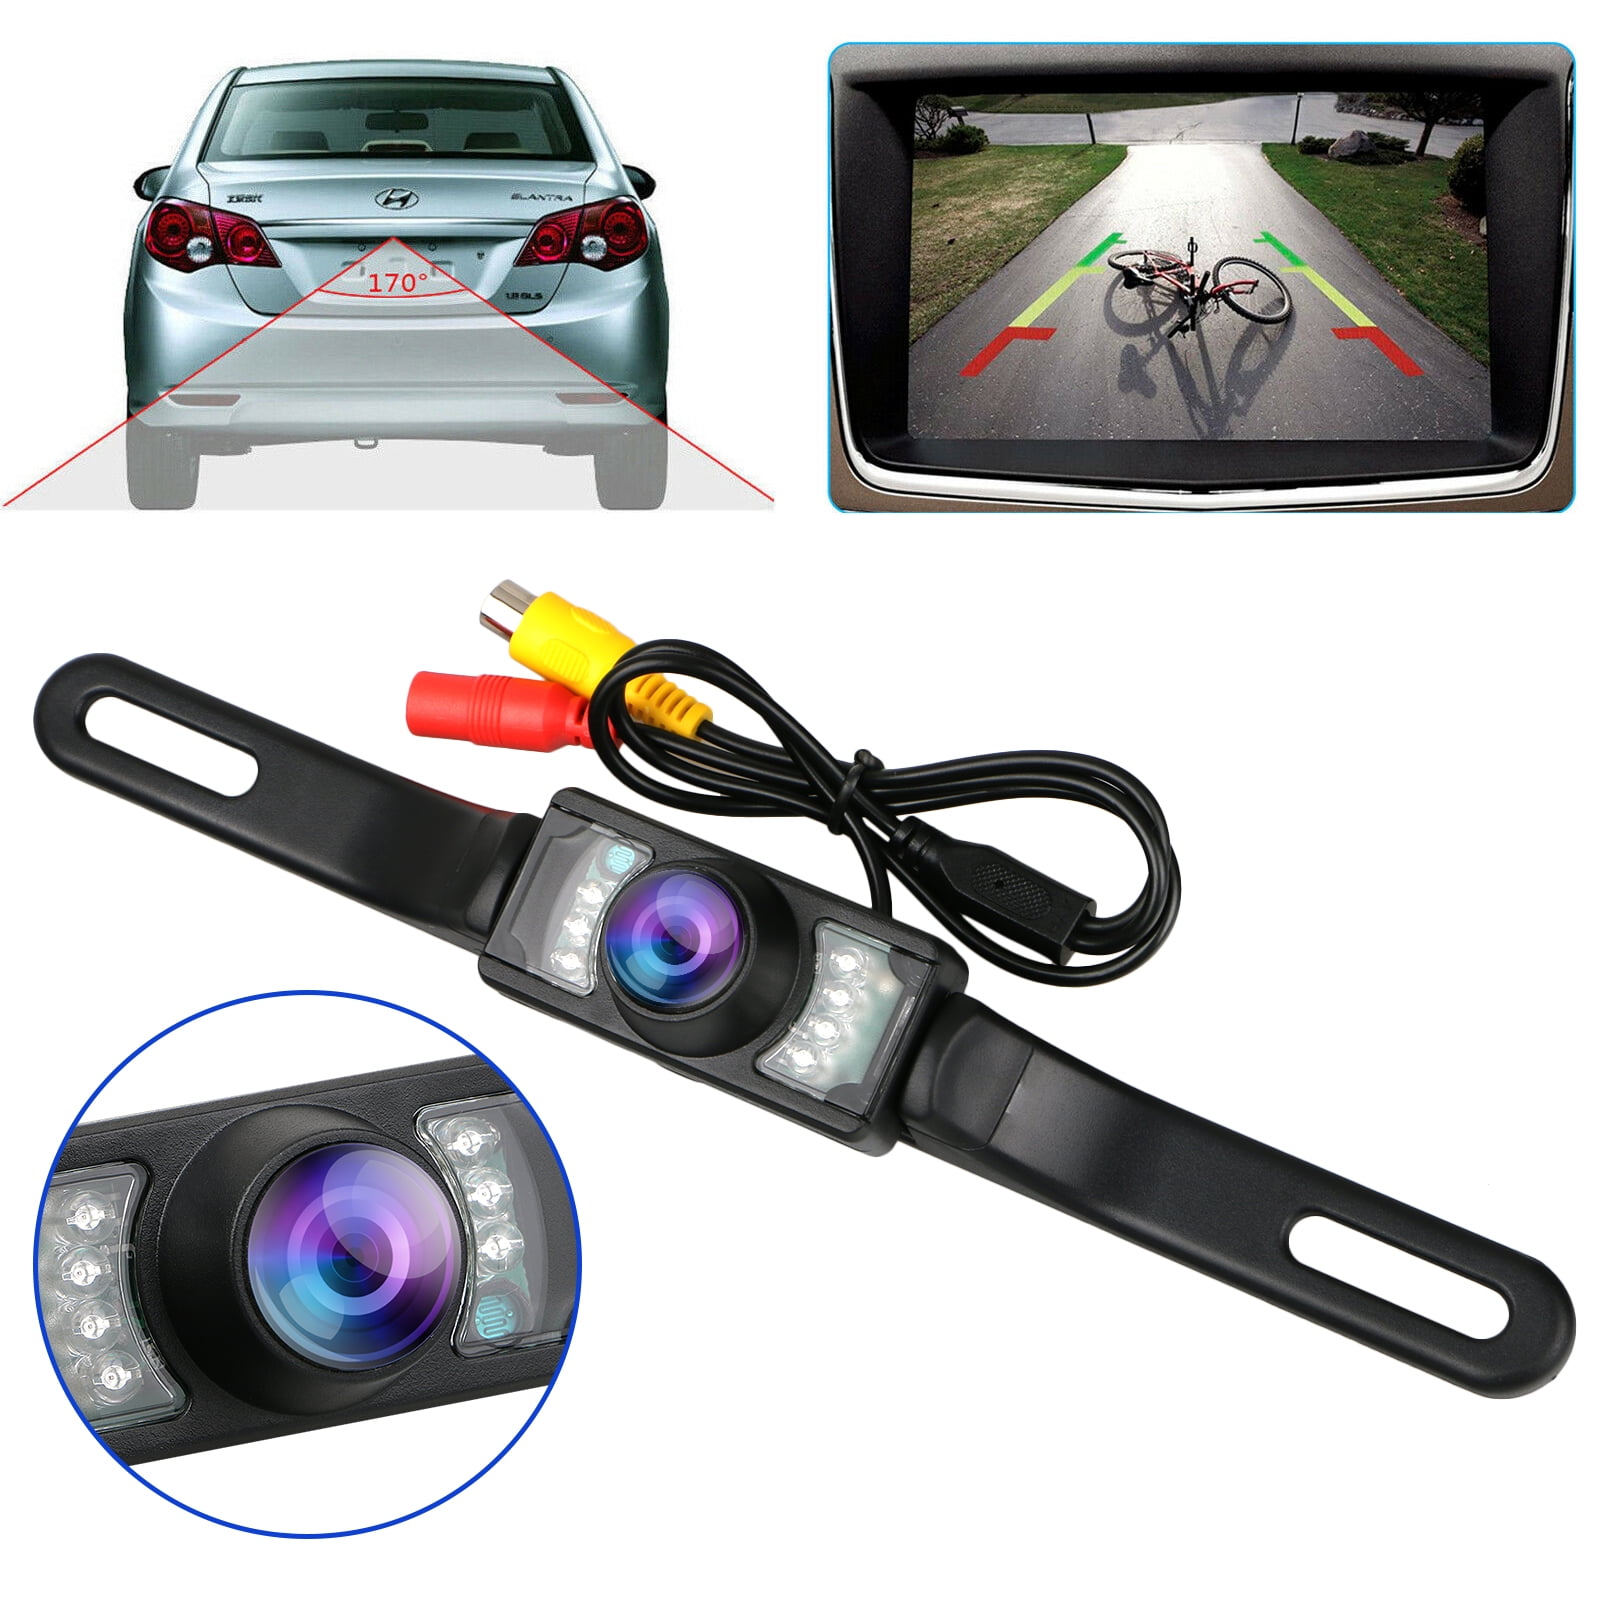 170° Wide HD Rear View Backup Camera License Plate Frame For US Car Night Vision